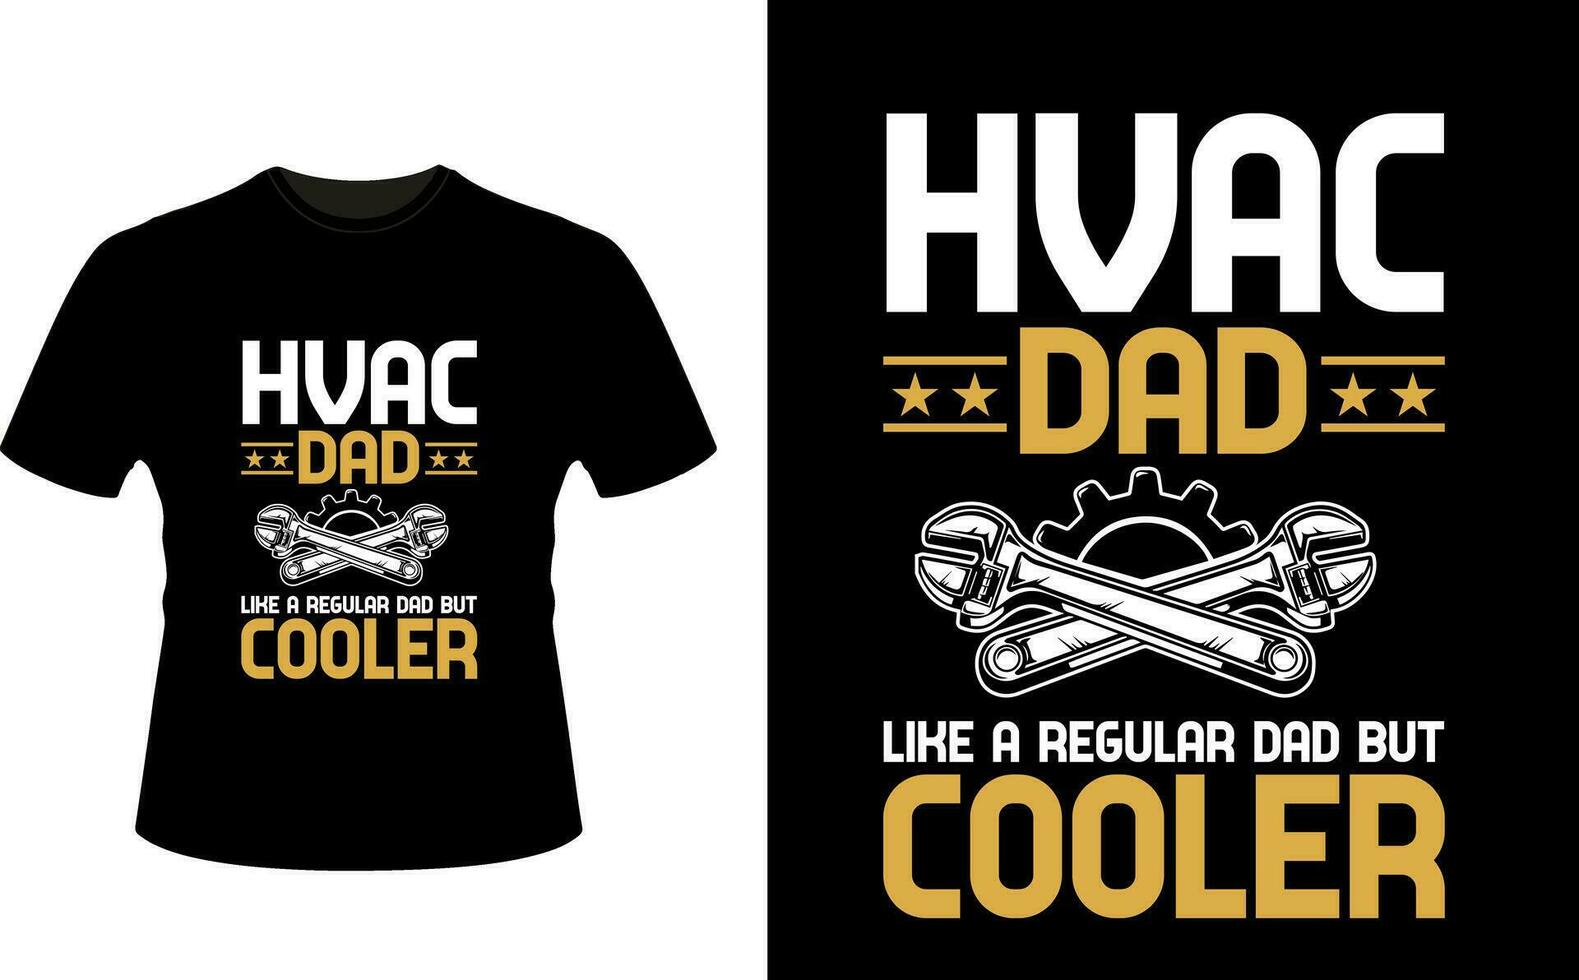 HVAC Dad Like a Regular Dad But Cooler or dad papa tshirt design or Father day t shirt Design vector